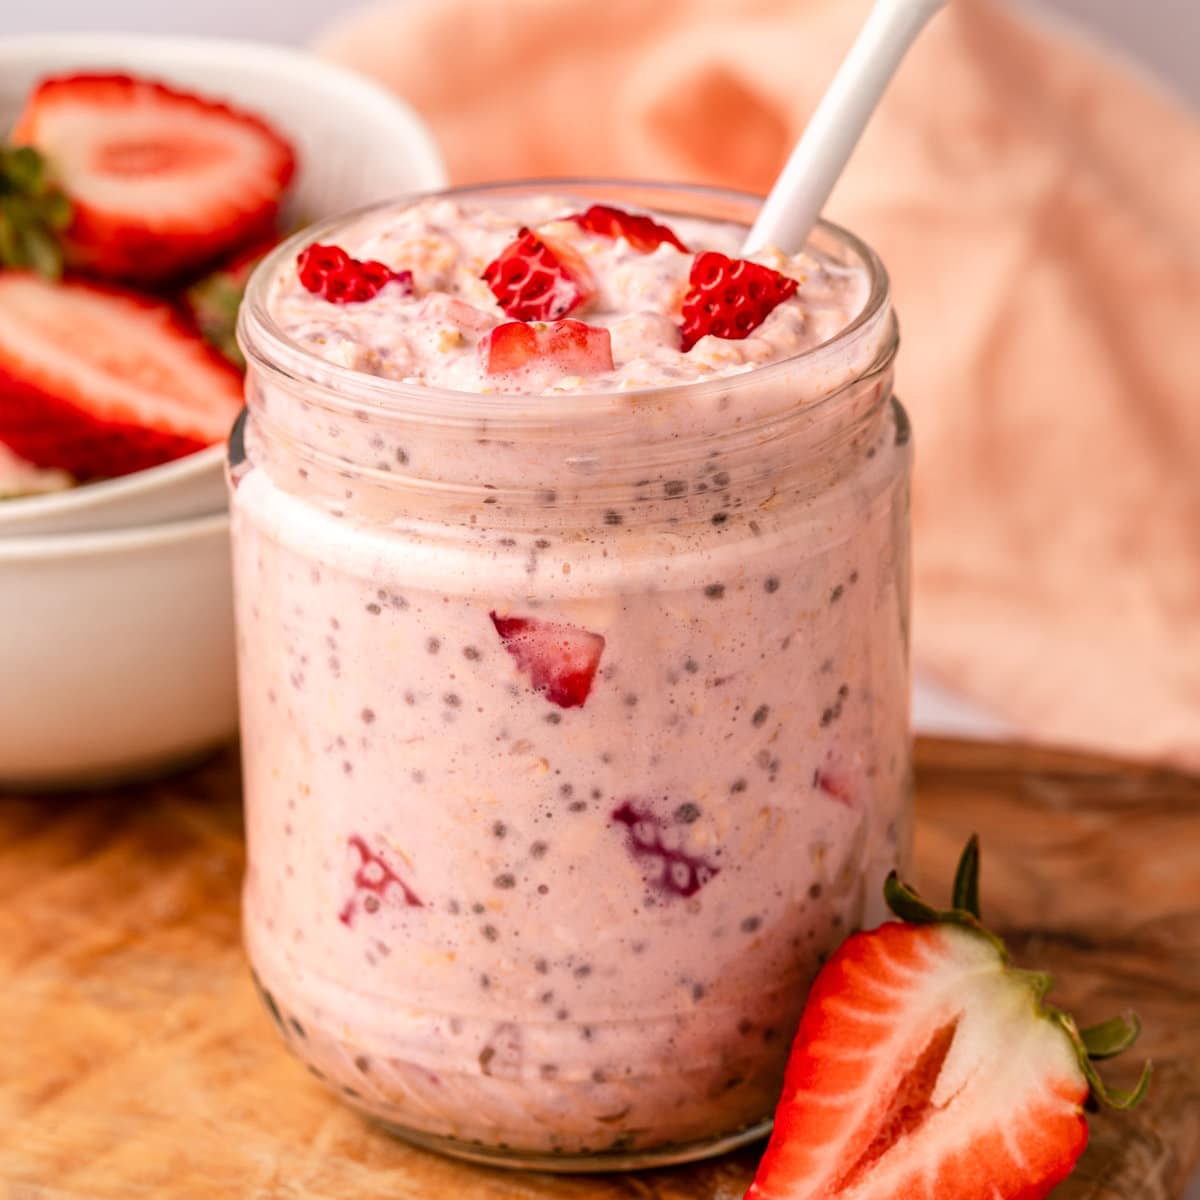 Strawberry Overnight Oats: Quick & Healthy Breakfast - Chelsweets